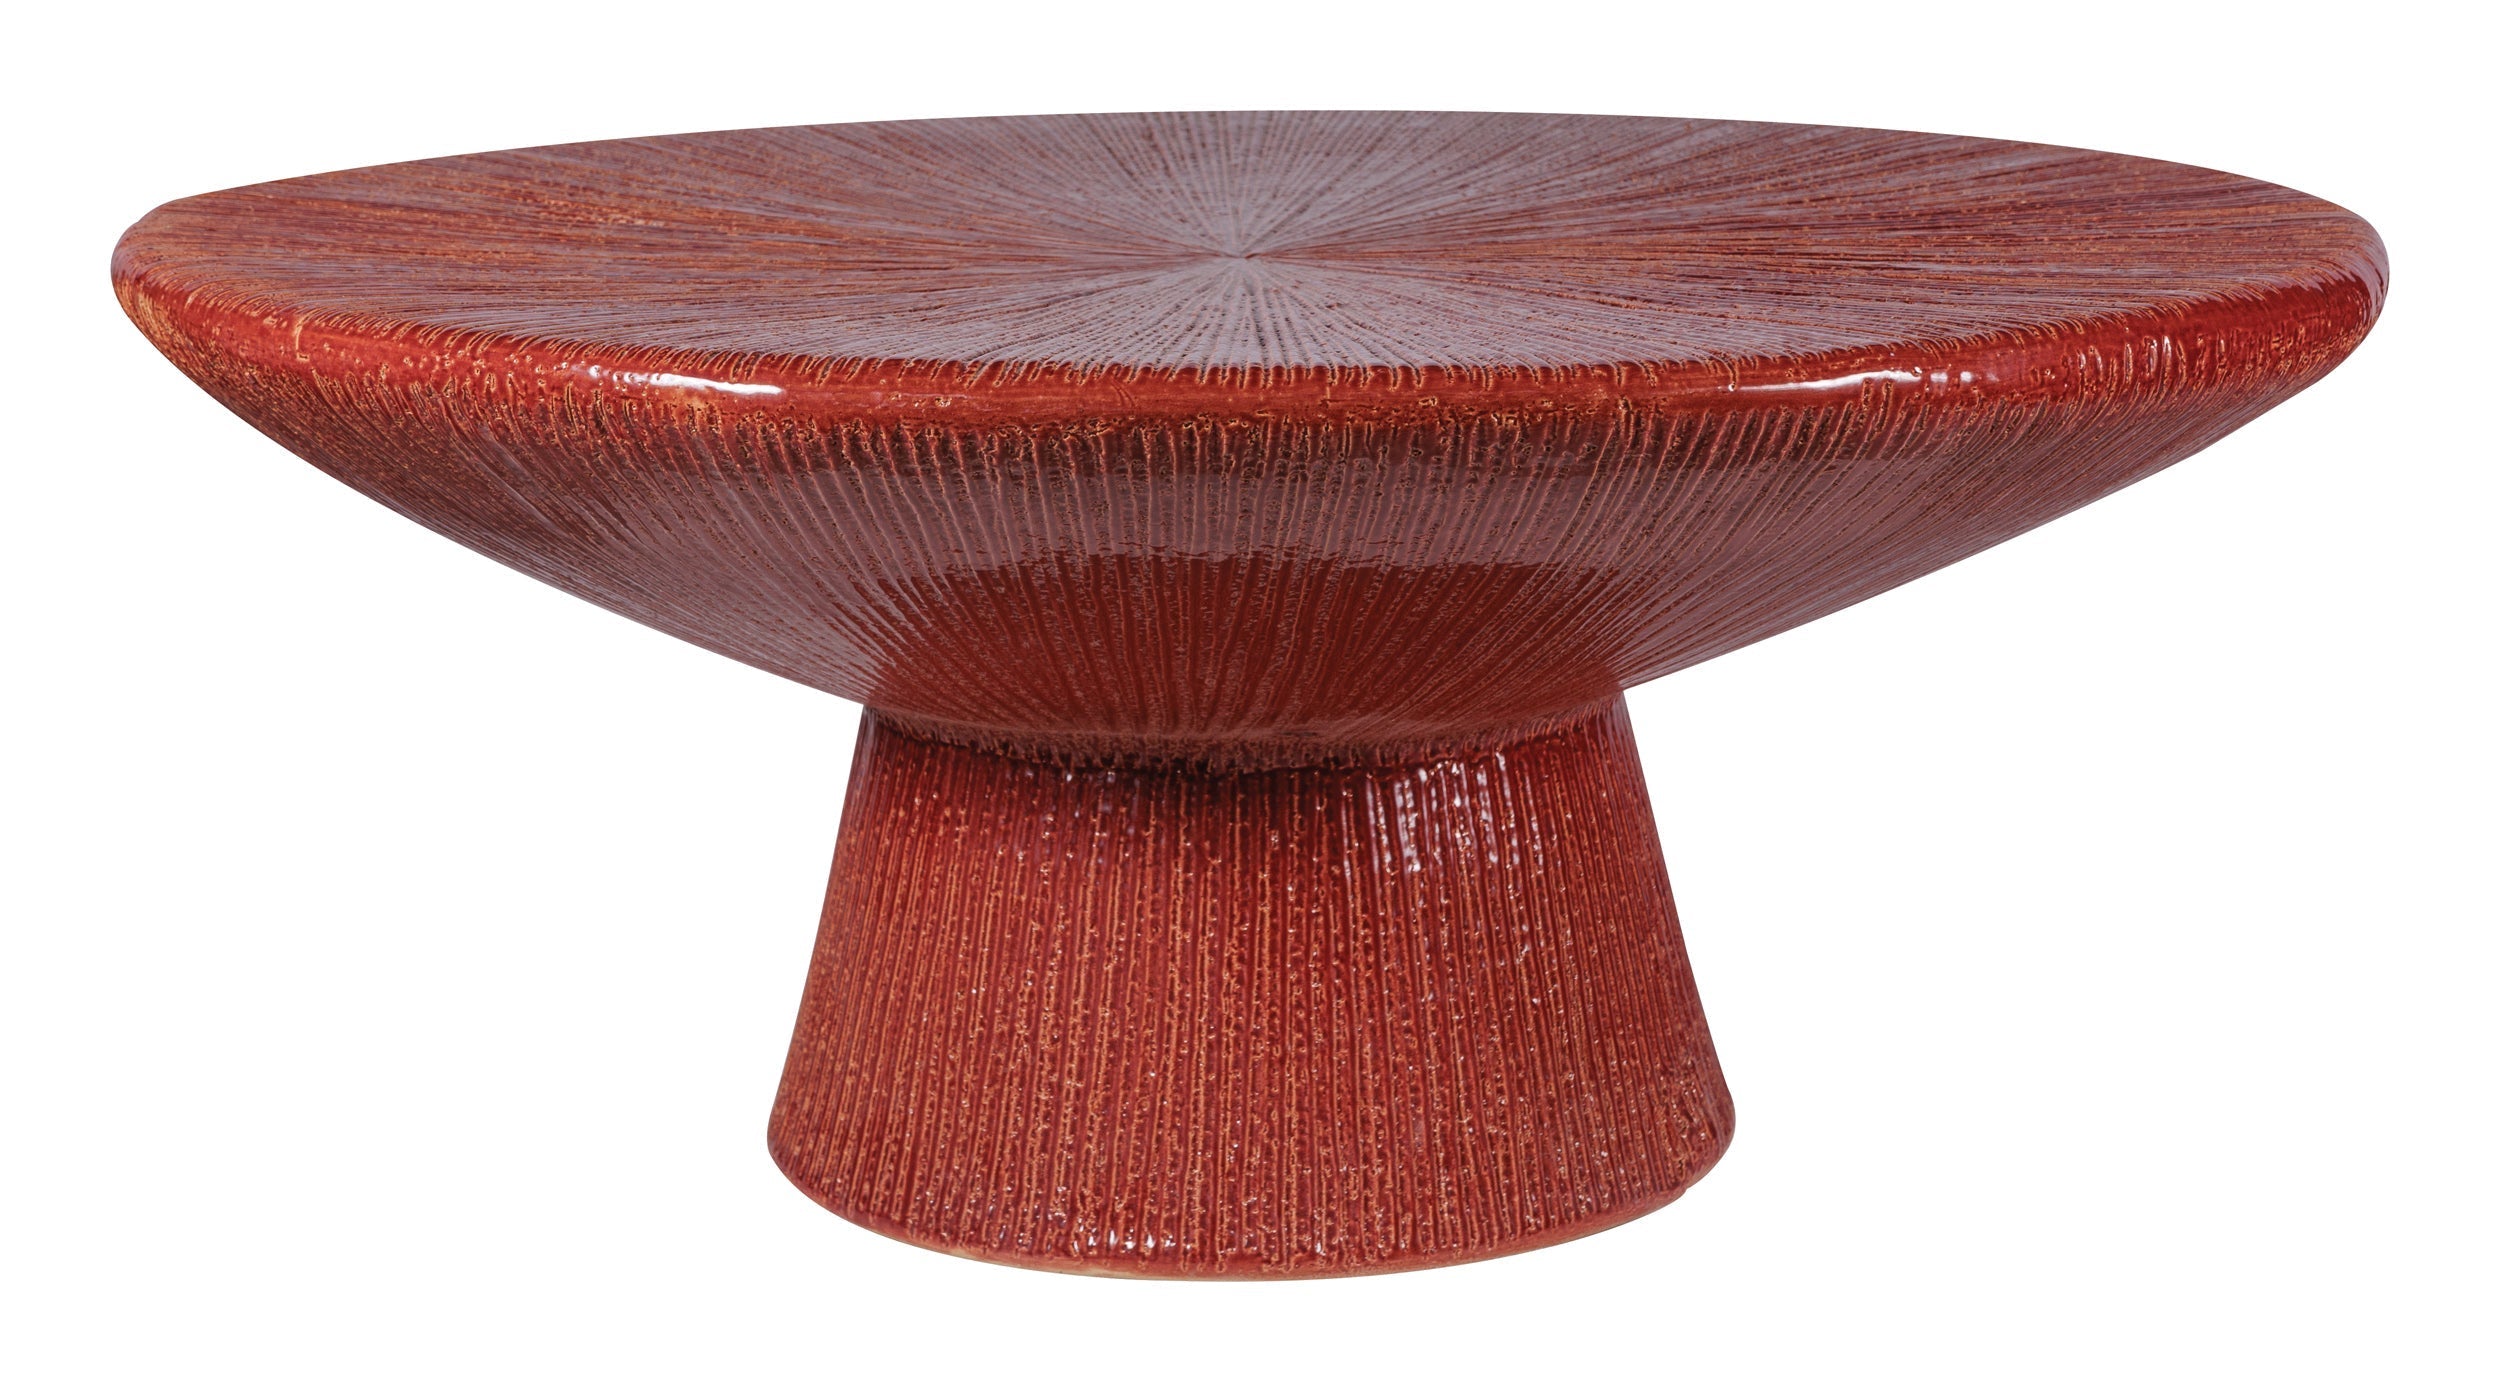 Sunburst Cocktail Table - Red Outdoor Coffee Table